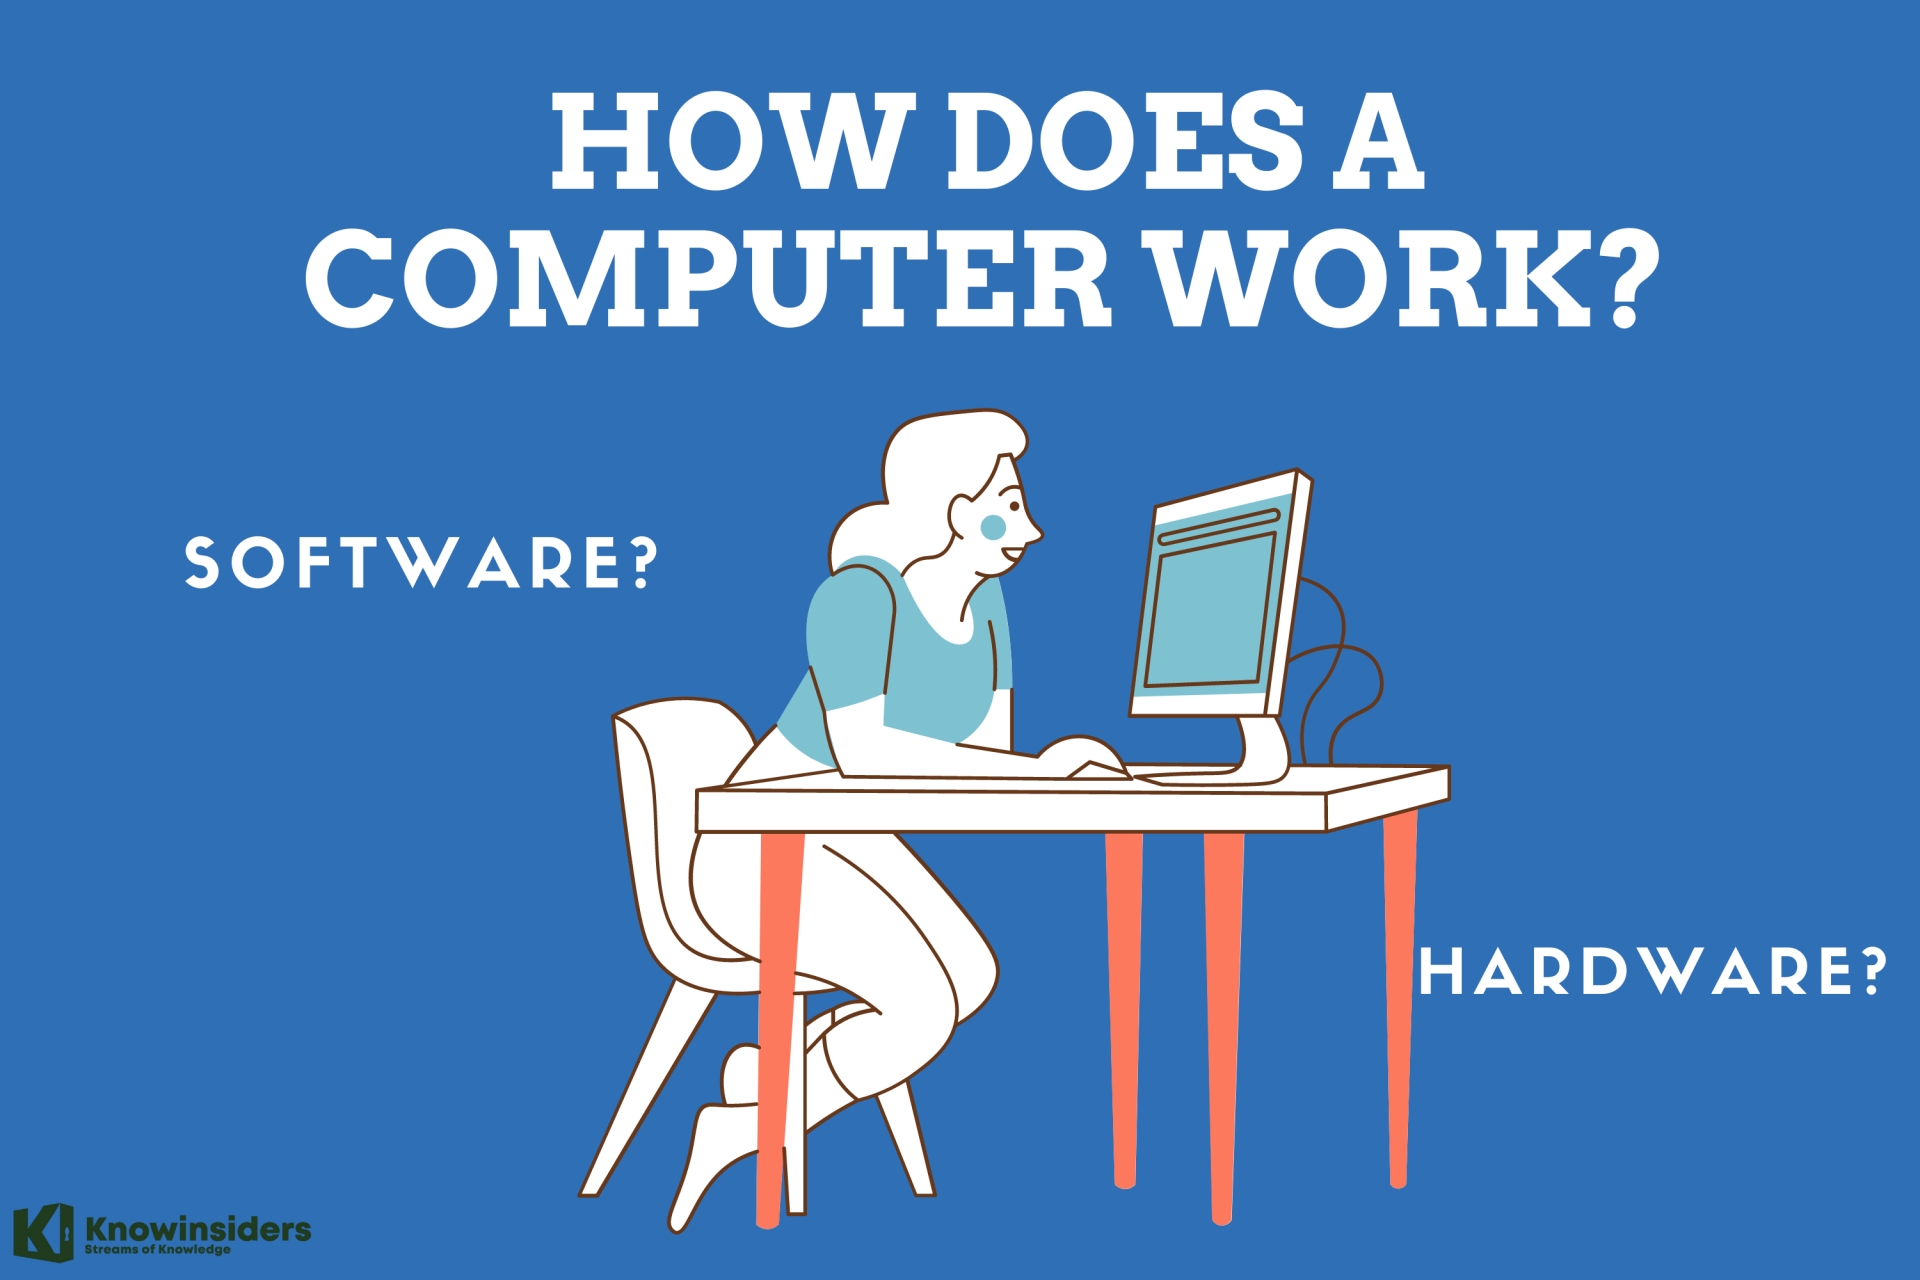 How Does A Computer Work?